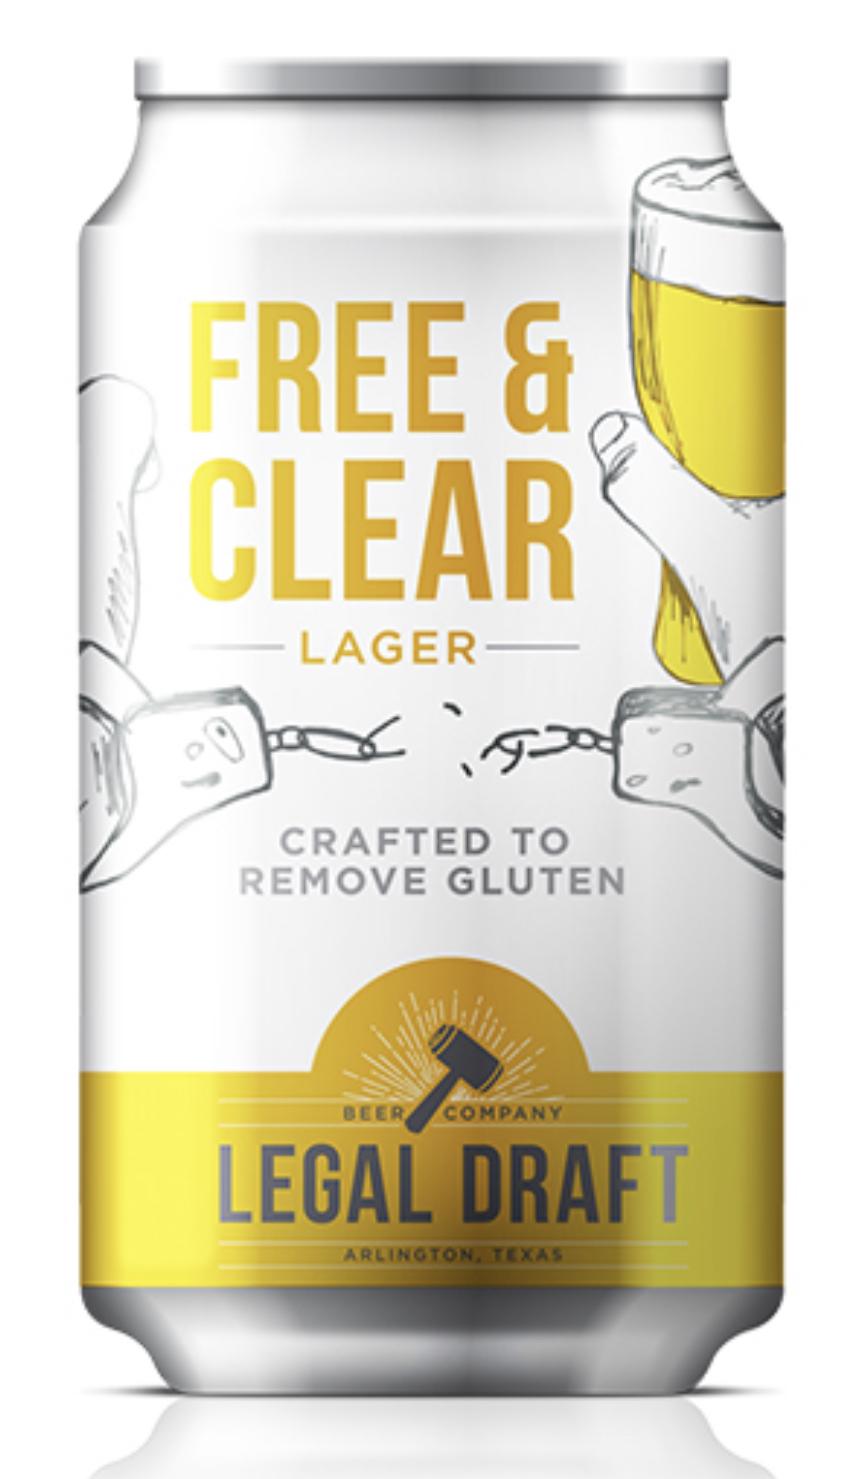 Free & Clear Lager